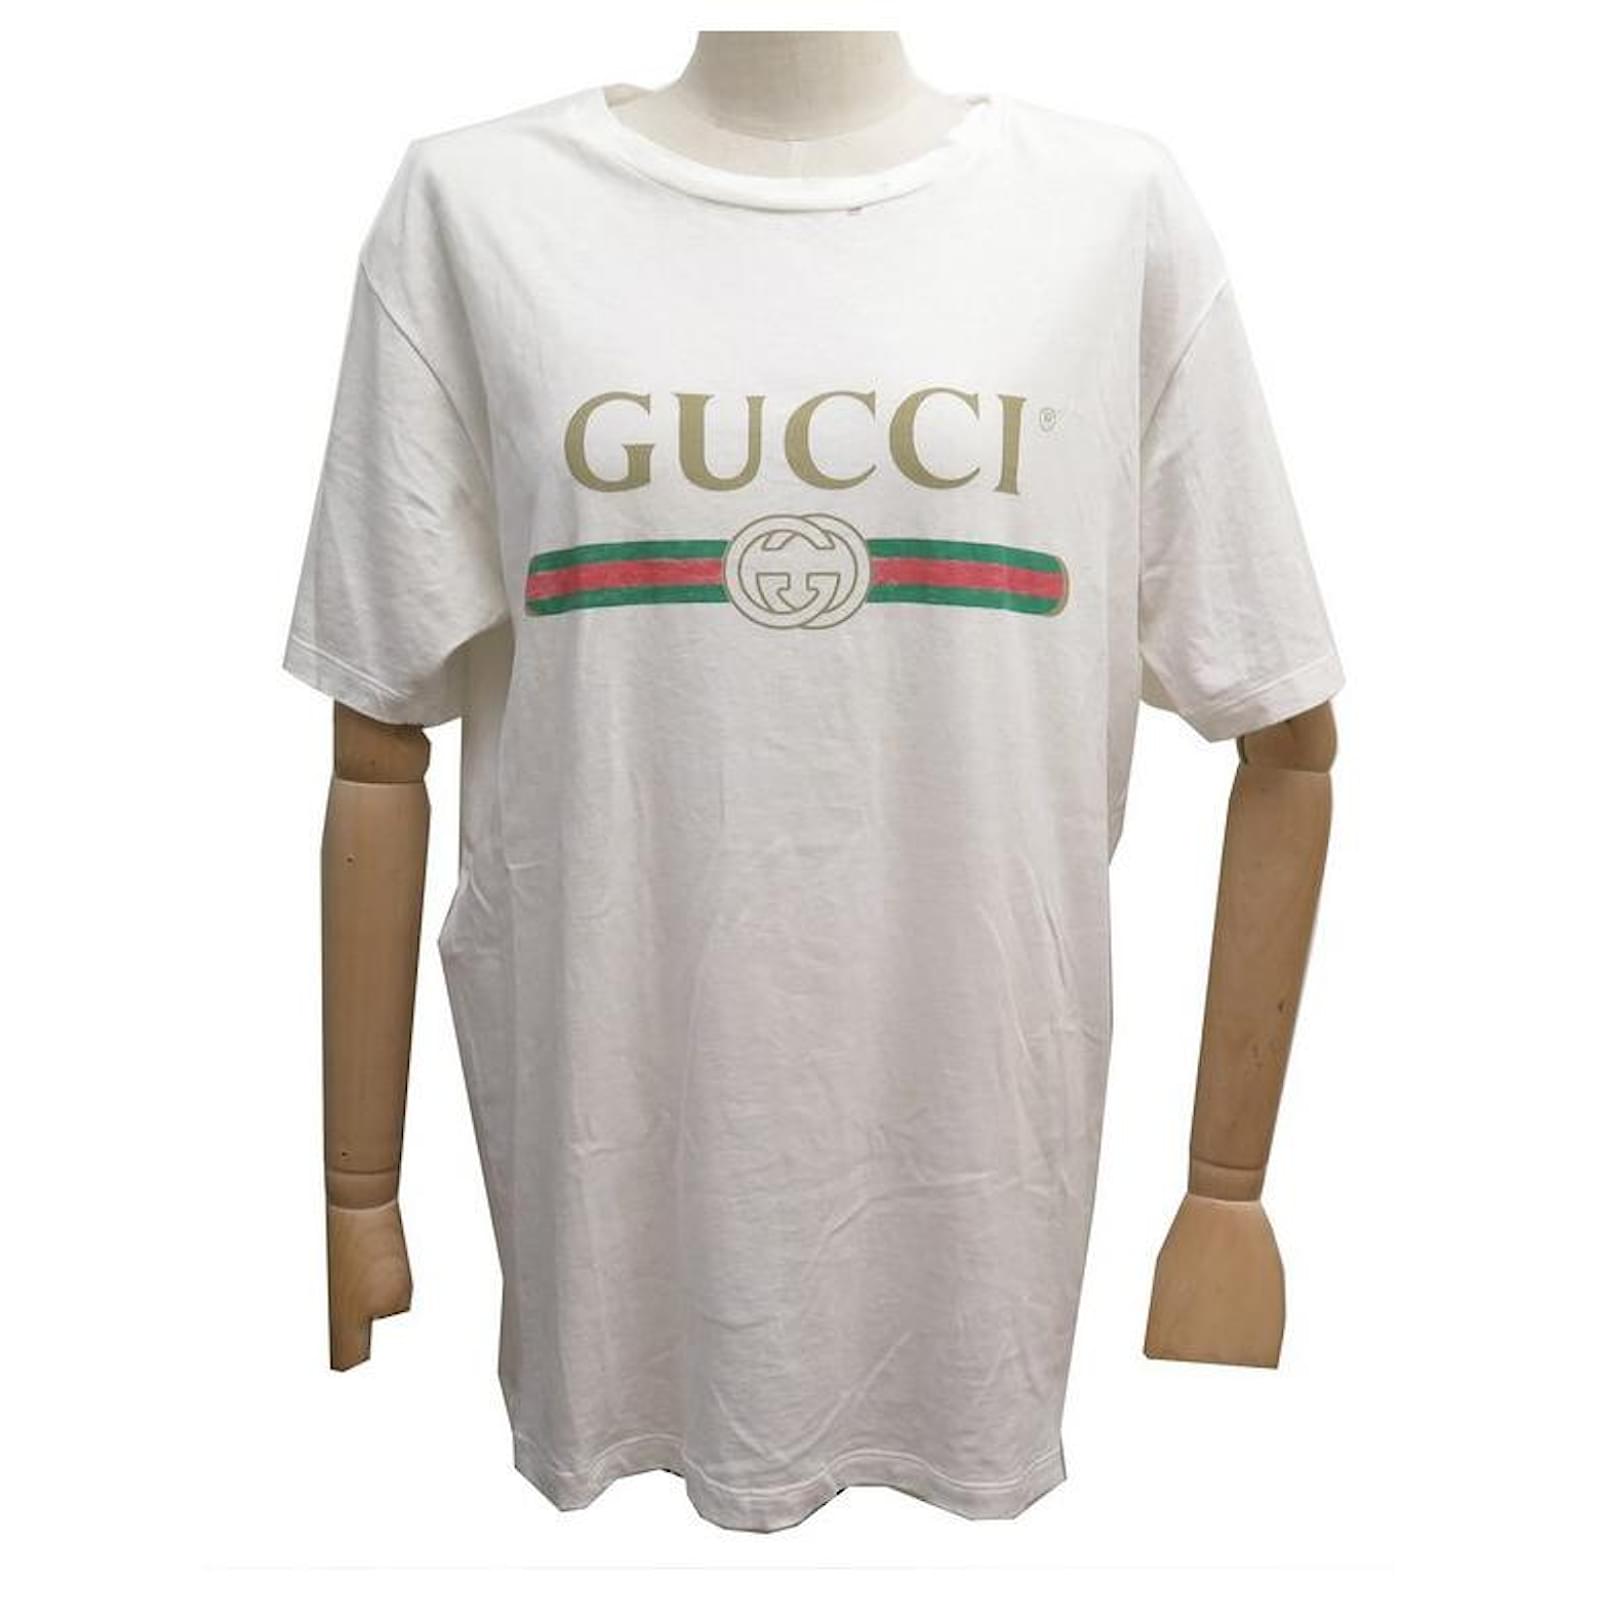 OVERSIZED GUCCI LOGO T-SHIRT 457095 S 38 IN WHITE COTTON TOP COTTON TOP